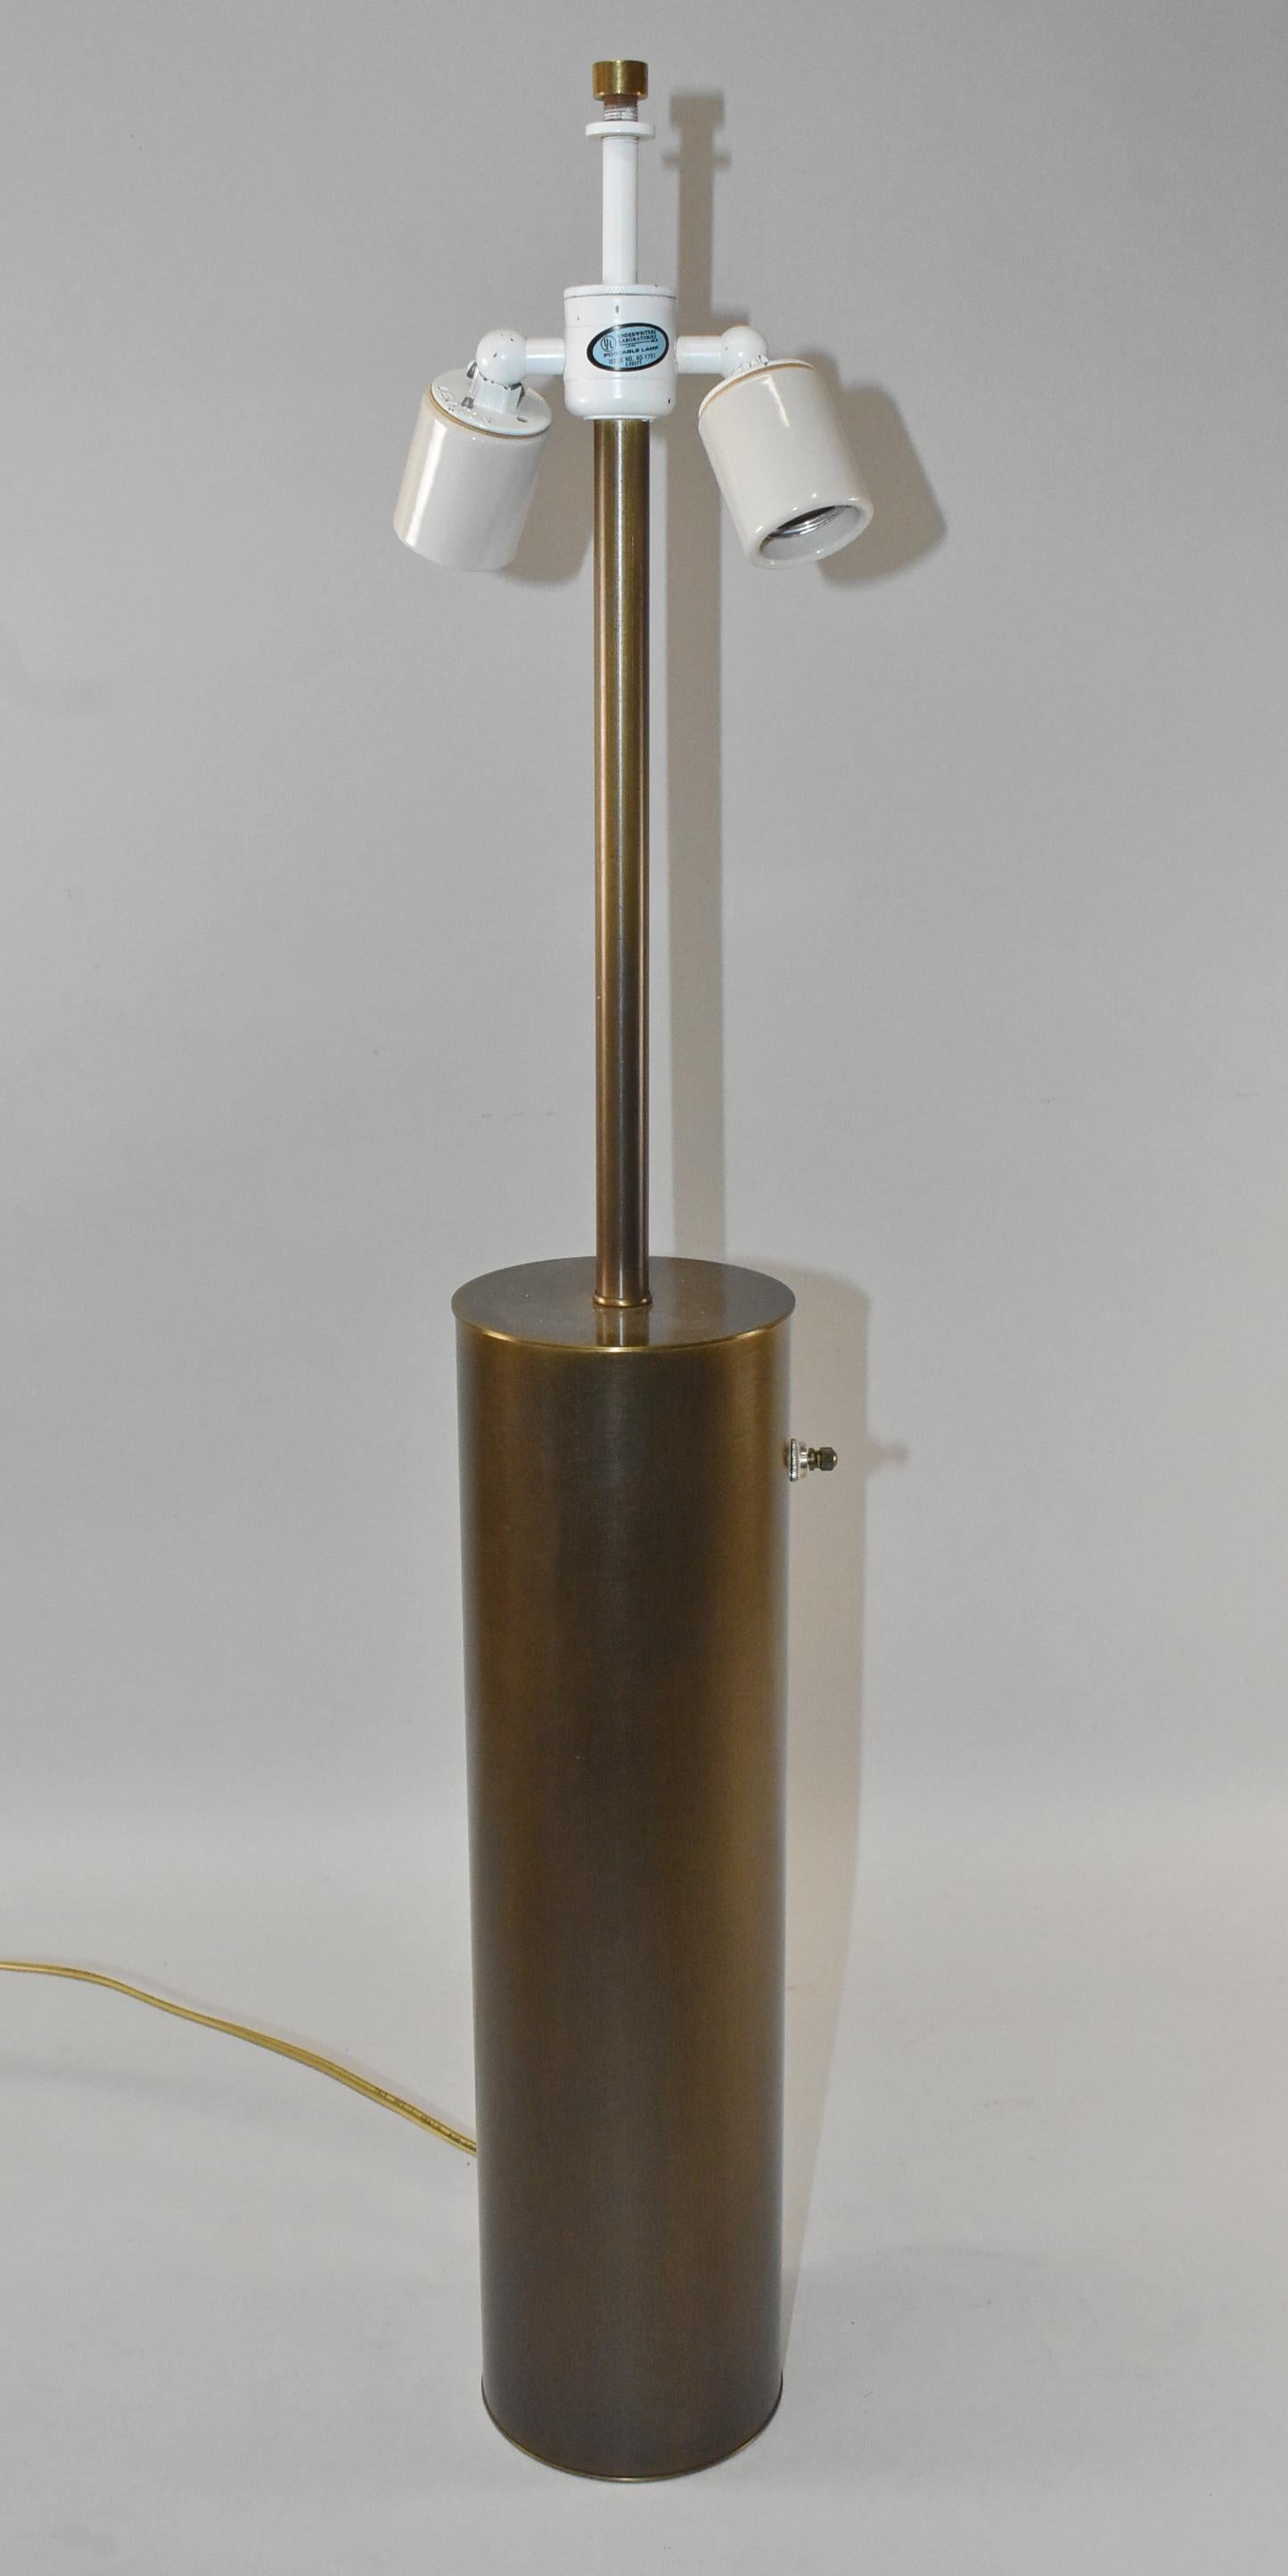 Modern brass cylinder double socket table lamp made in Bronx, N.Y. by Nessen. Leviton sockets.